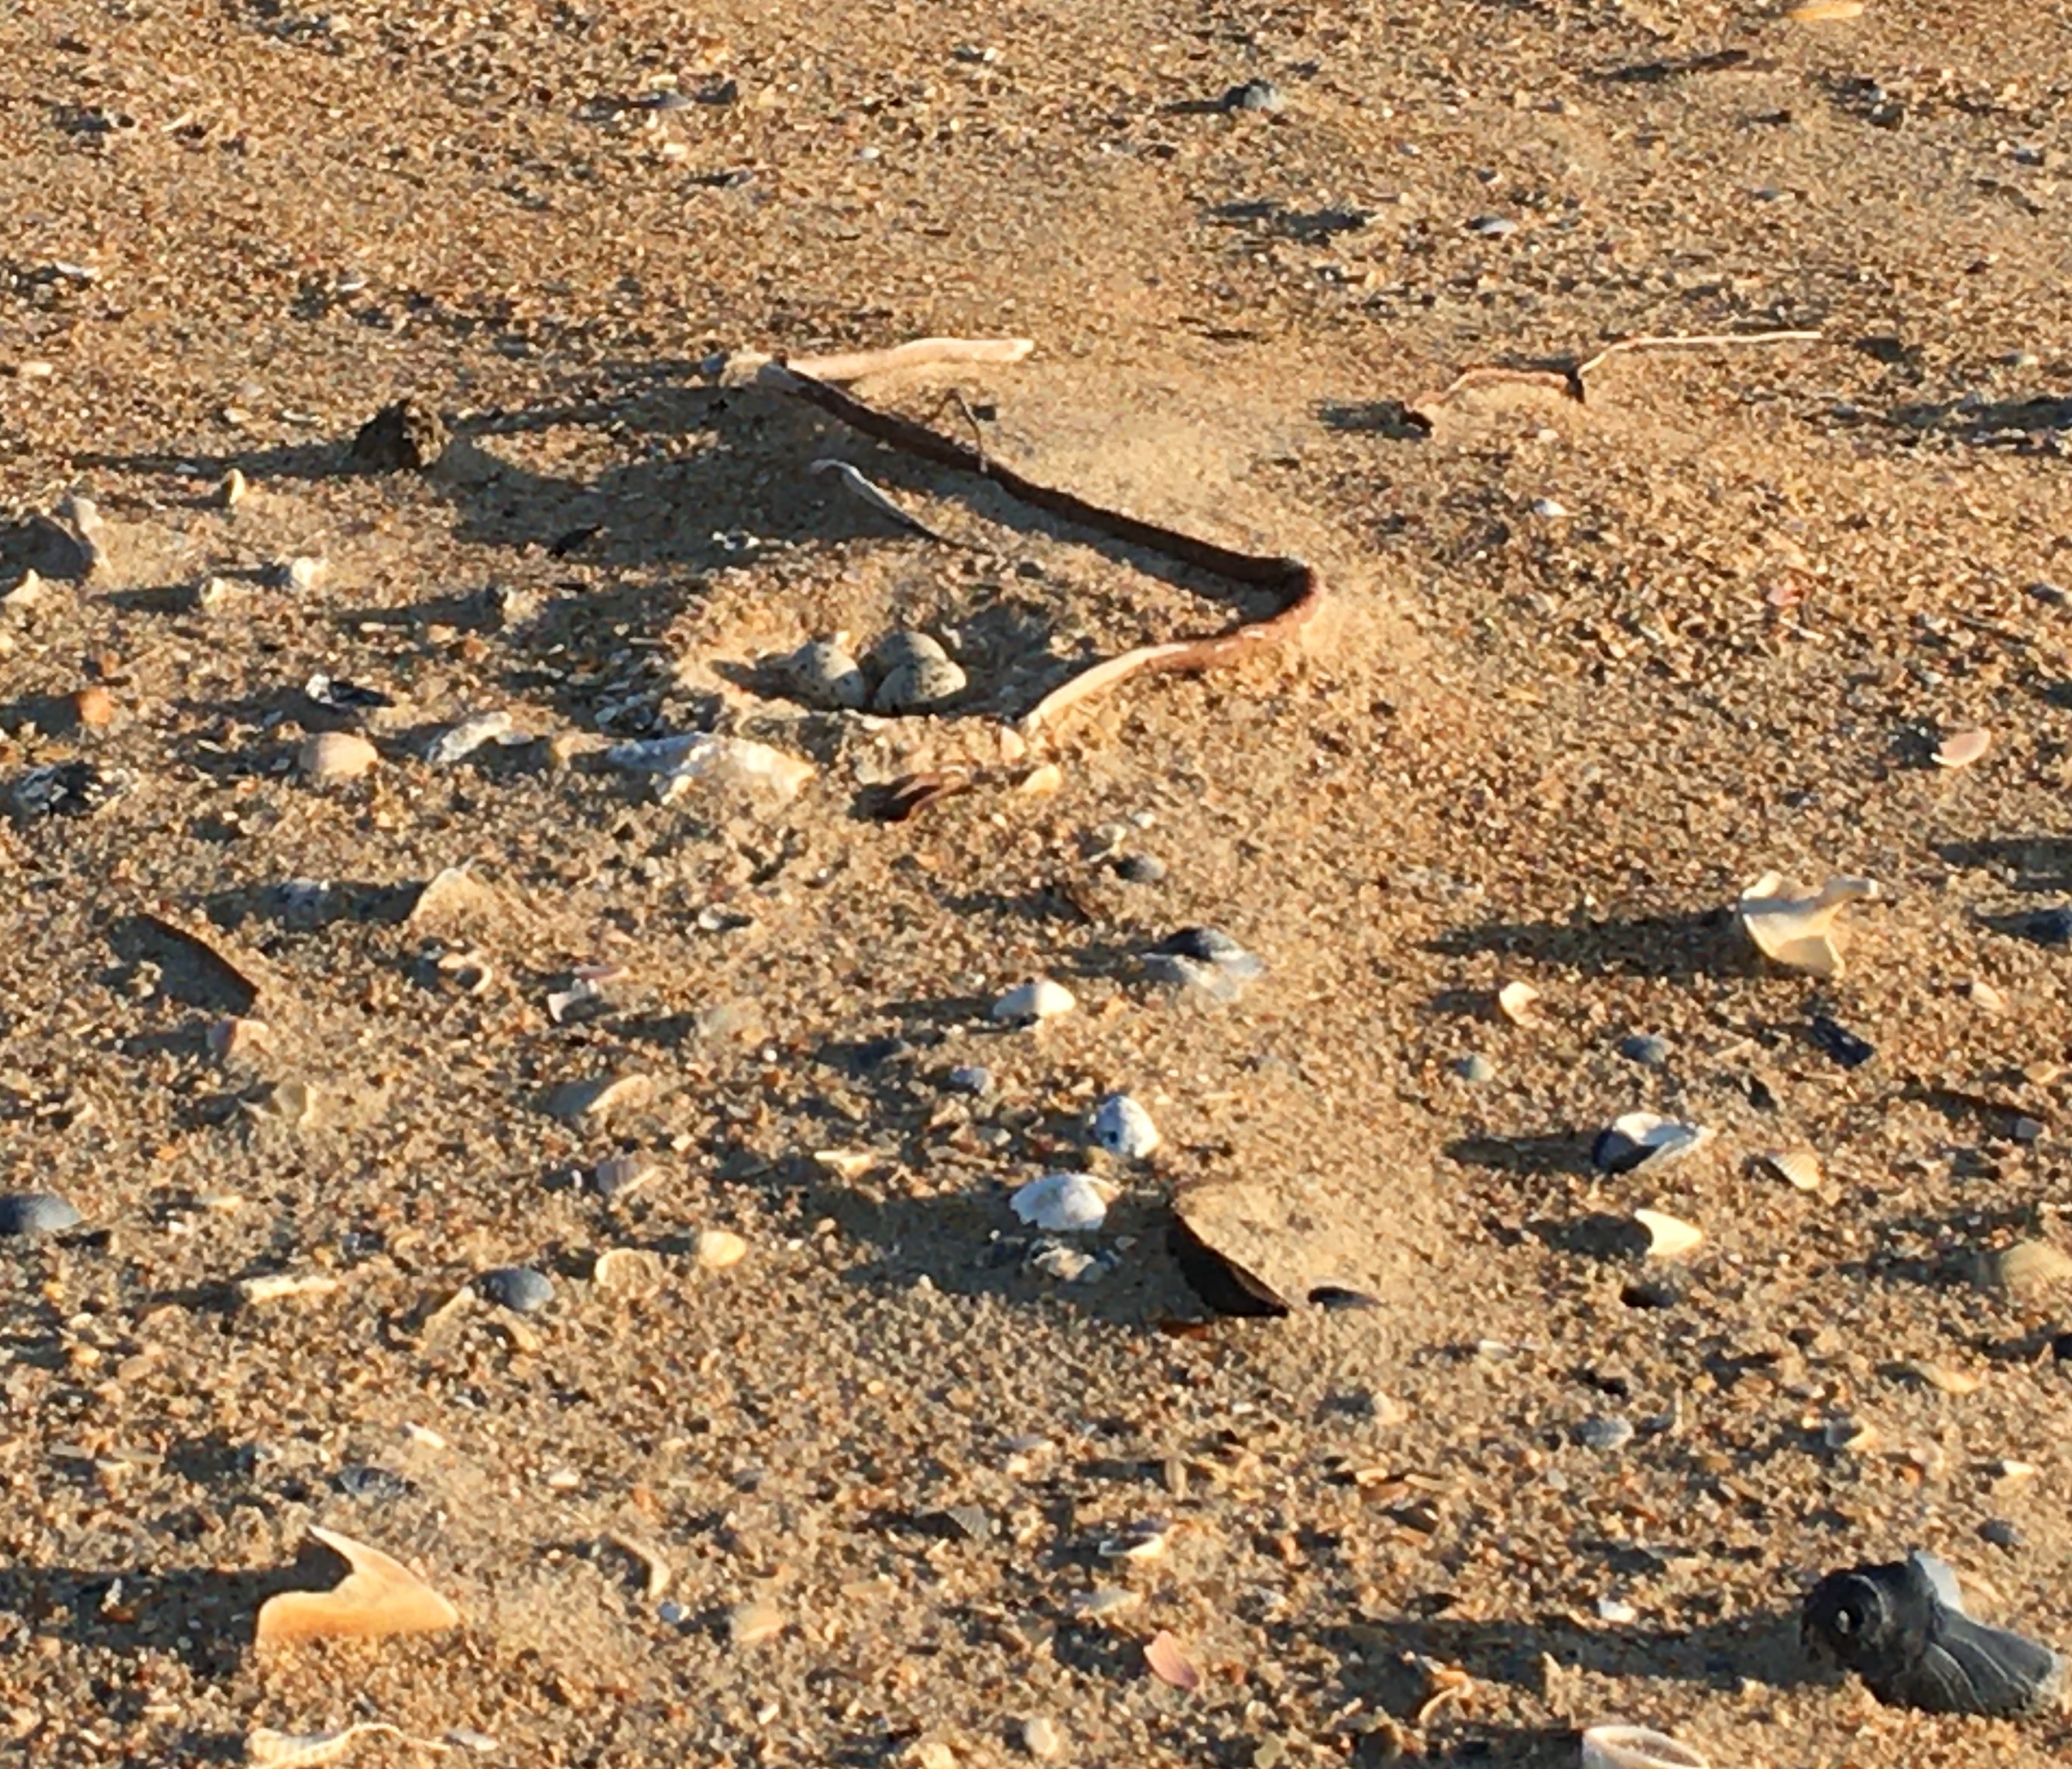 3-egg American oystercatcher nest among shells and debris on the South Beach closure Area.